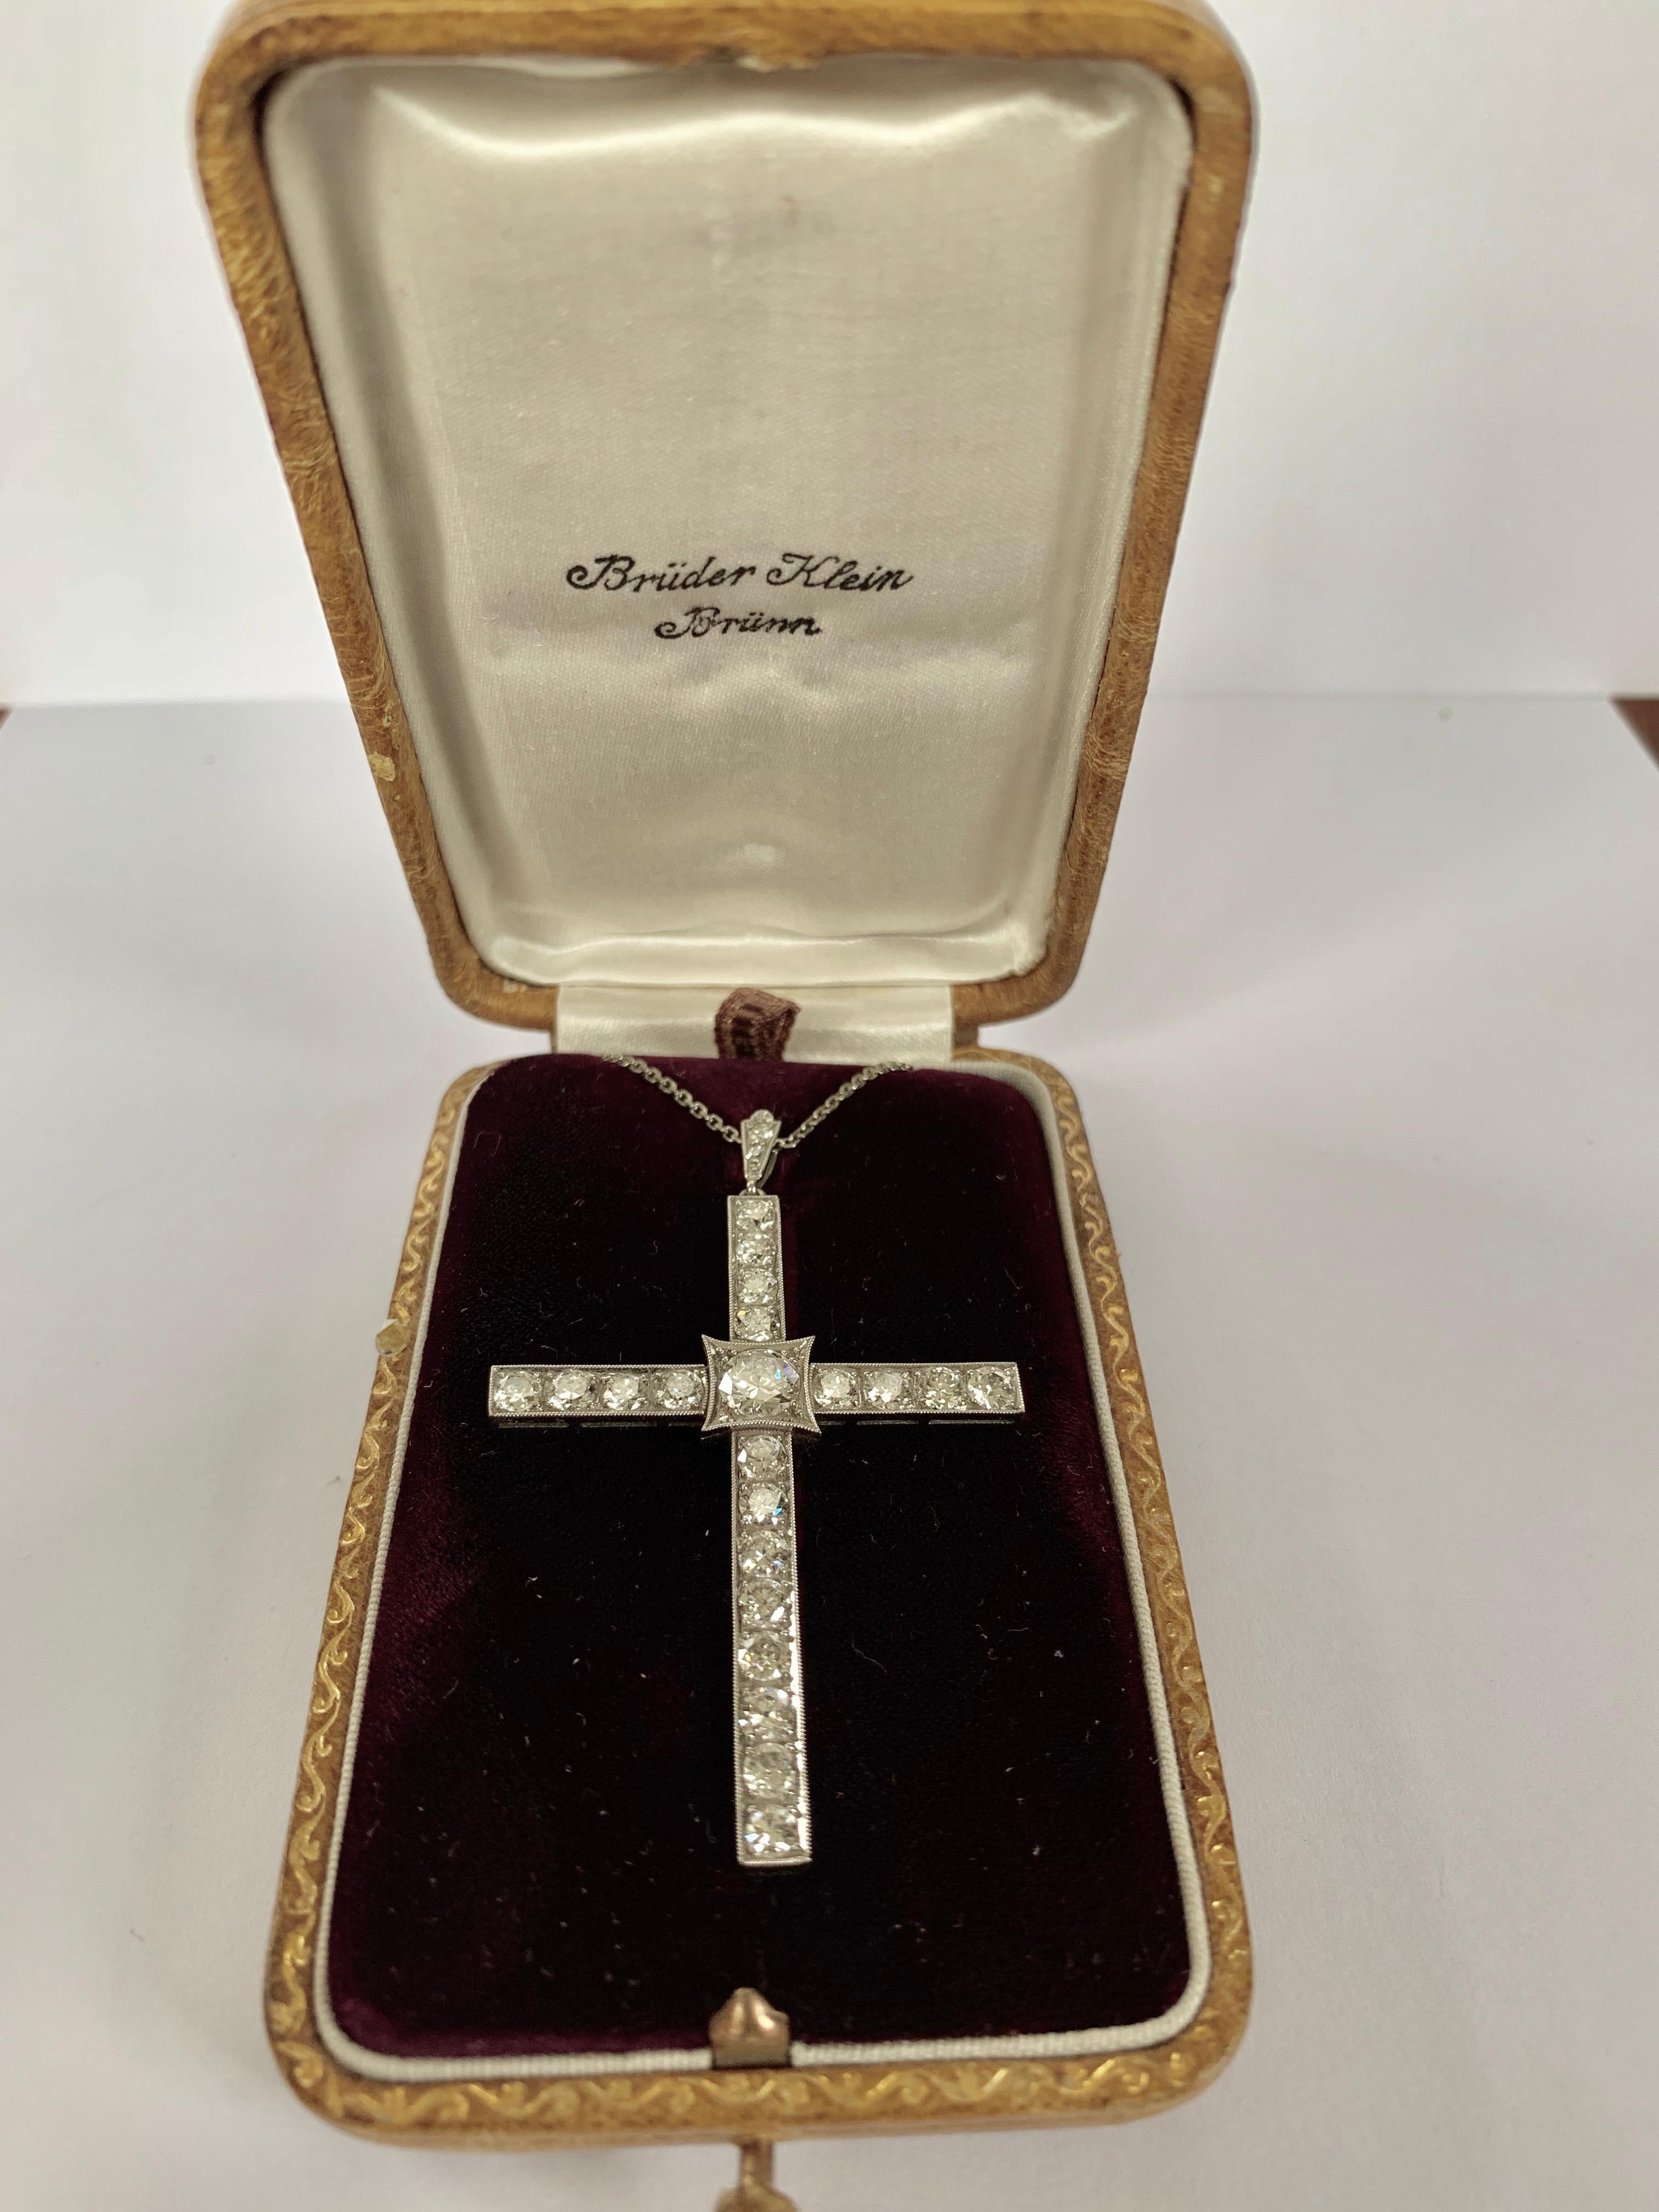 This stunning antique Art Deco diamond cross pendant of immaculate workmanship is crafted in solid platinum. The center is exposing a sparkling European round-faceted diamond weighing approximately 0.50cts, H color, si clarity. The fascinating cross